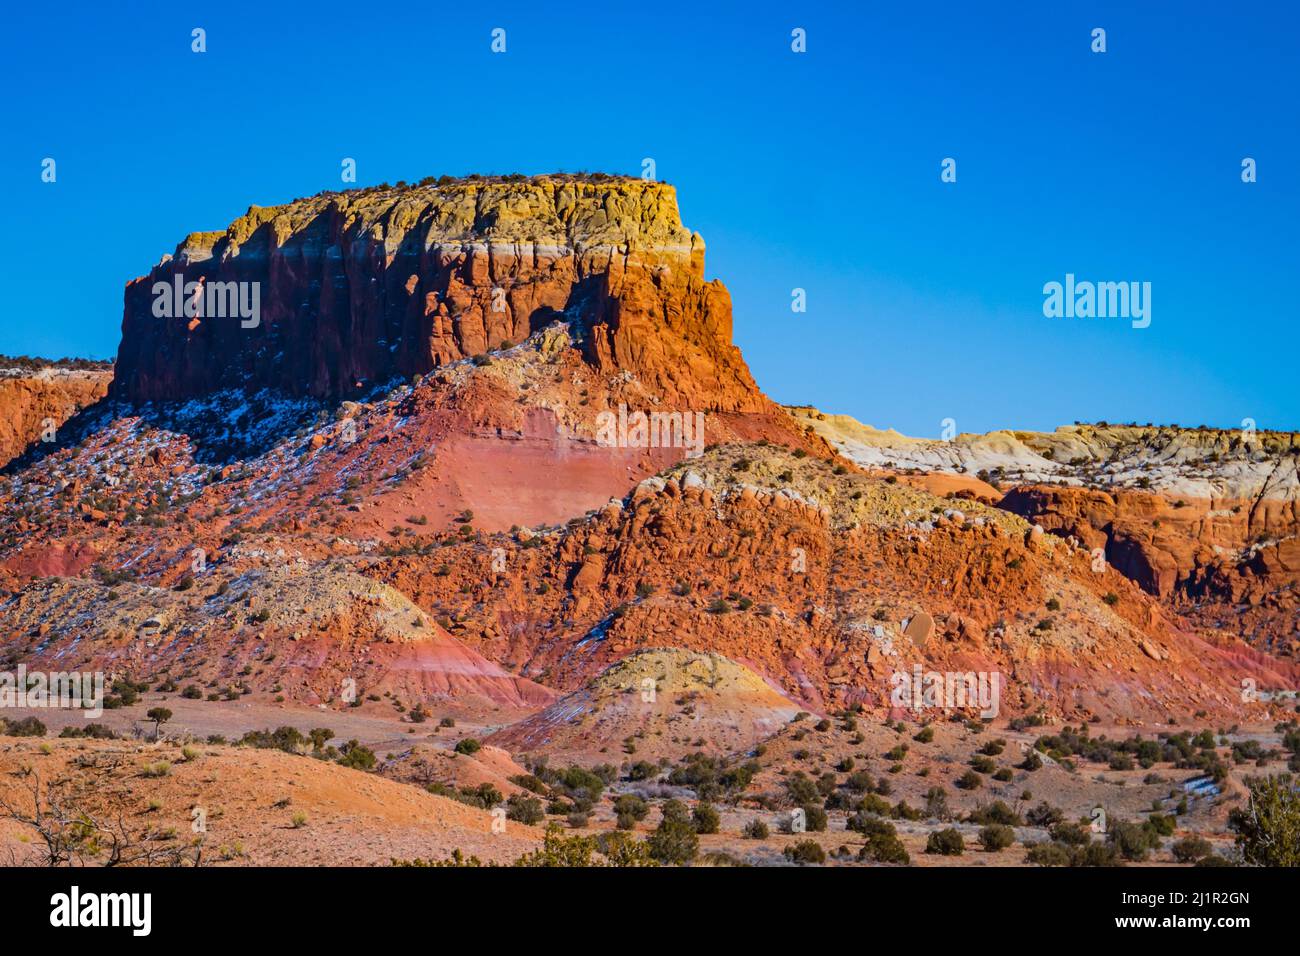 Mesa with colorful layers of sandstone and gypsum exposed after erosion over time Stock Photo